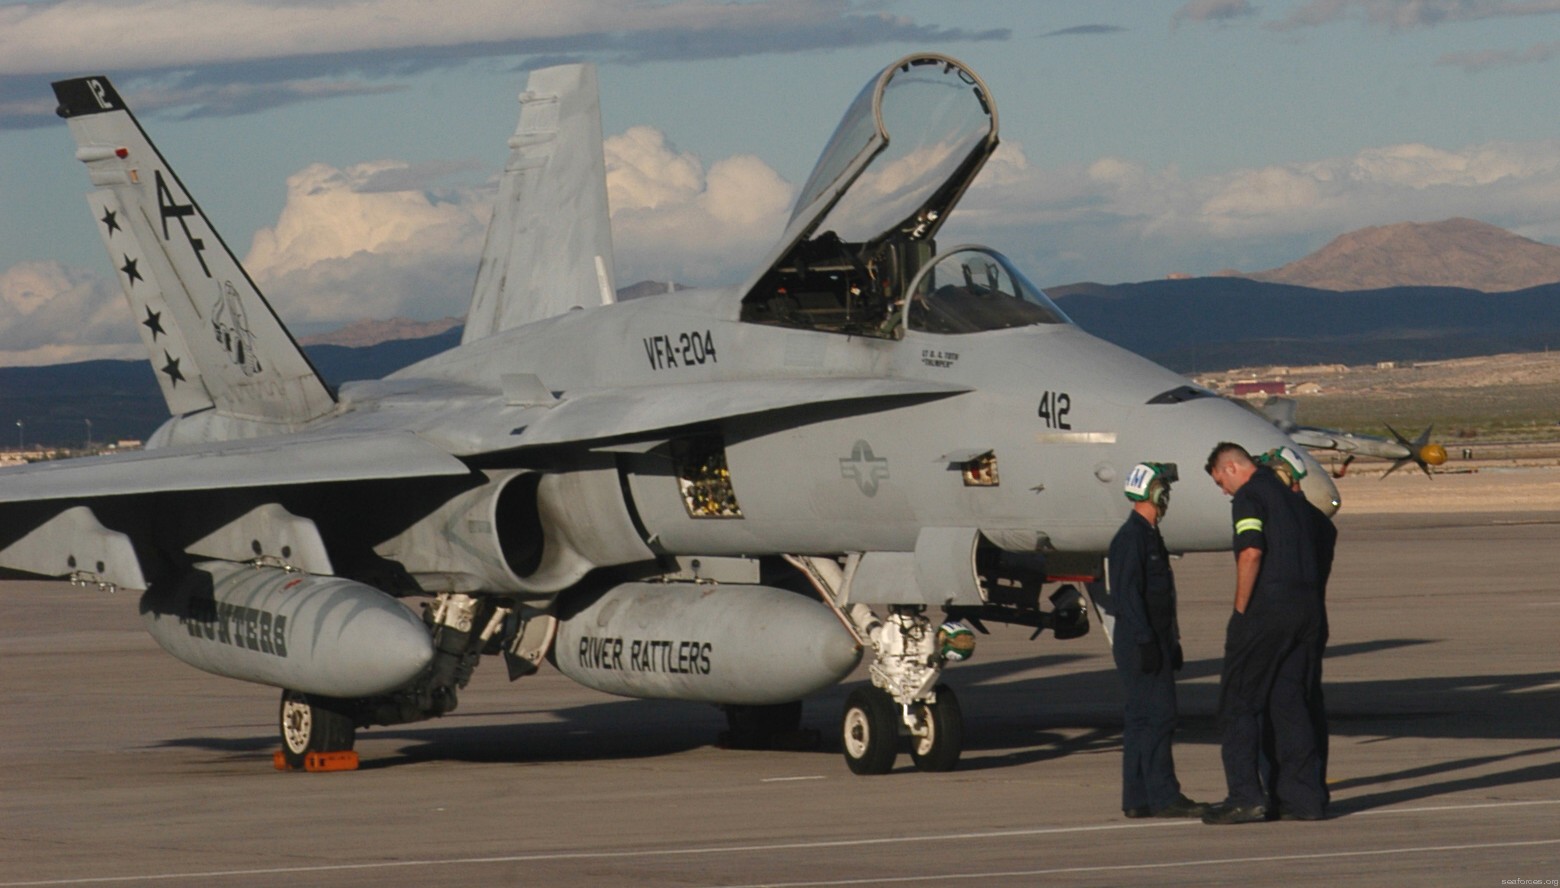 vfa-204 river rattlers f/a-18a+ hornet strike fighter squadron us navy reserve 31 nellis afb nevada